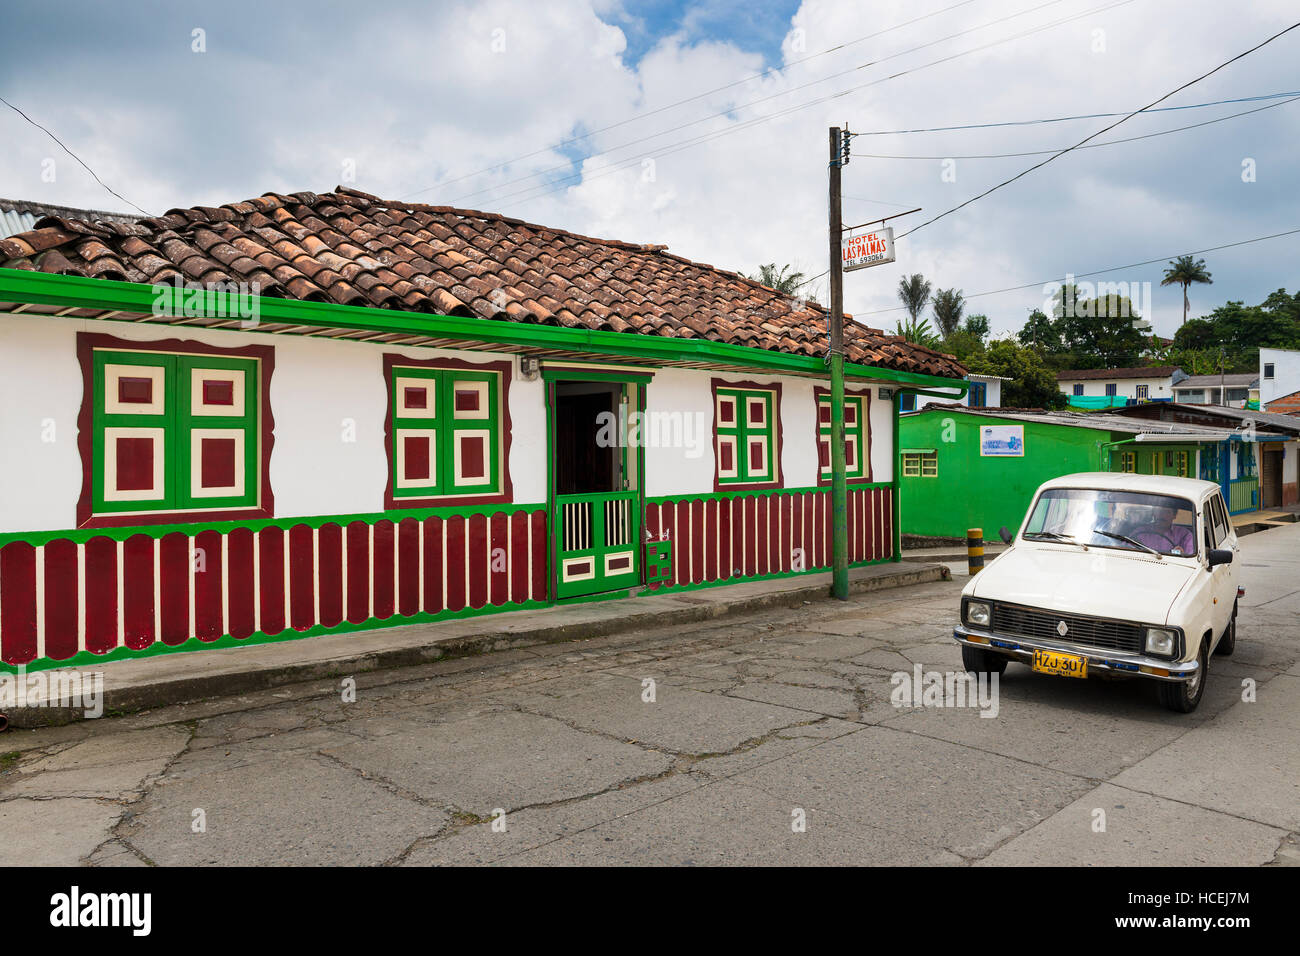 Salento, Colombia - February 10, 2014: An old car in a street of the town of Salento, in Colombia, with an old colorful colonial house; Stock Photo